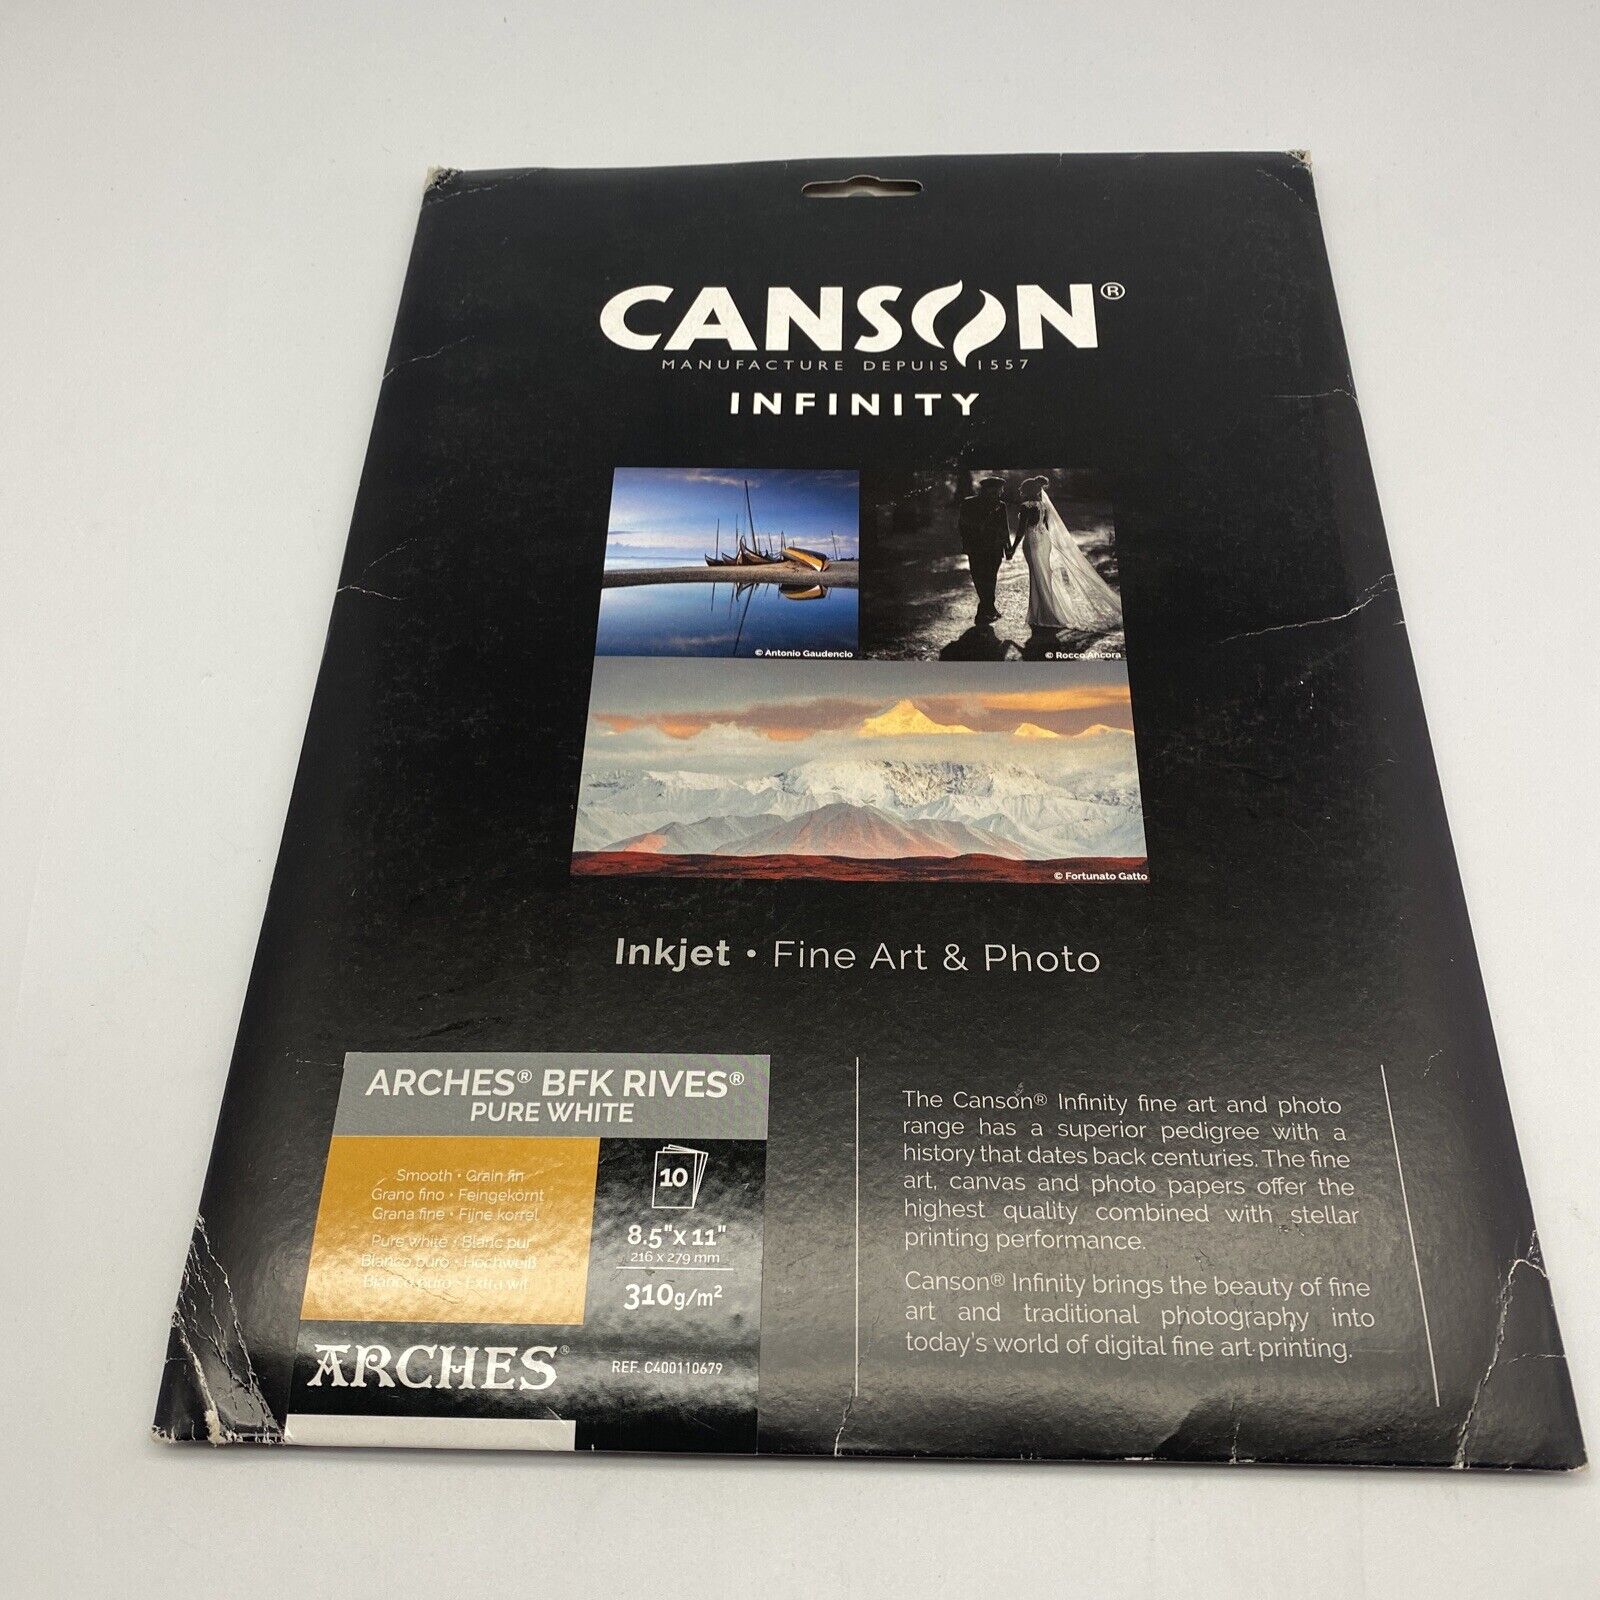 Canson Infinity ARCHES BFK RIVES White Matte Inkjet Paper, 8.5x11",10 Sheets